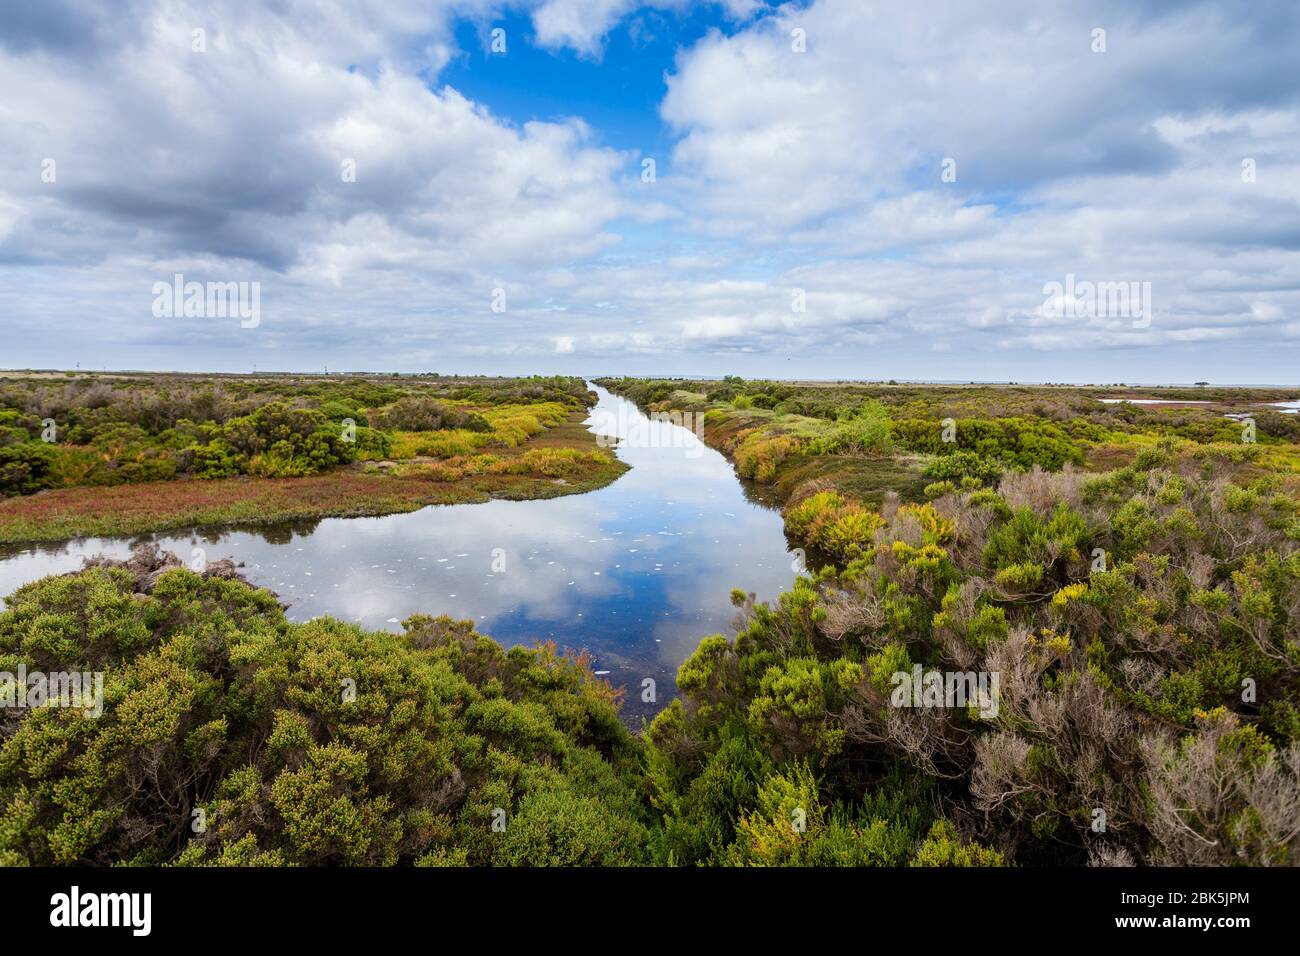 A saltmarsh at South Australia with a high diversity of marsh plants Stock Photo